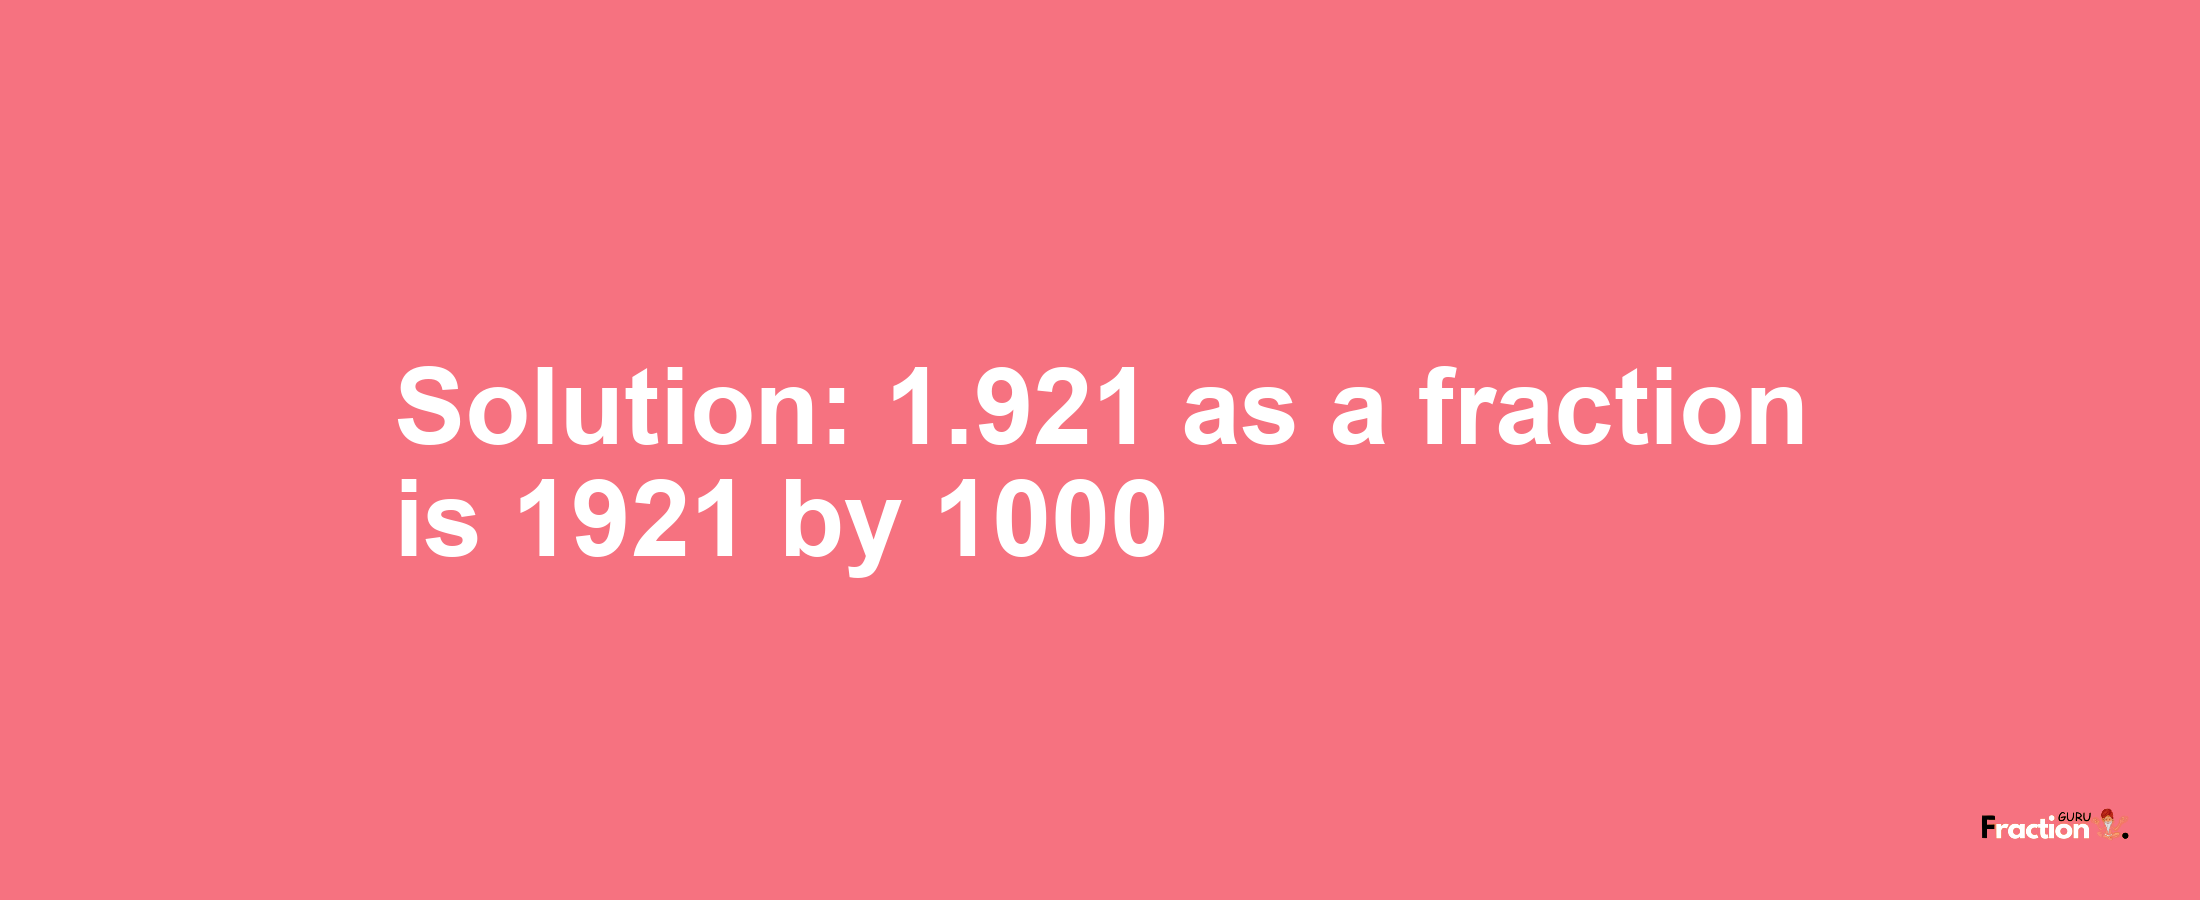 Solution:1.921 as a fraction is 1921/1000